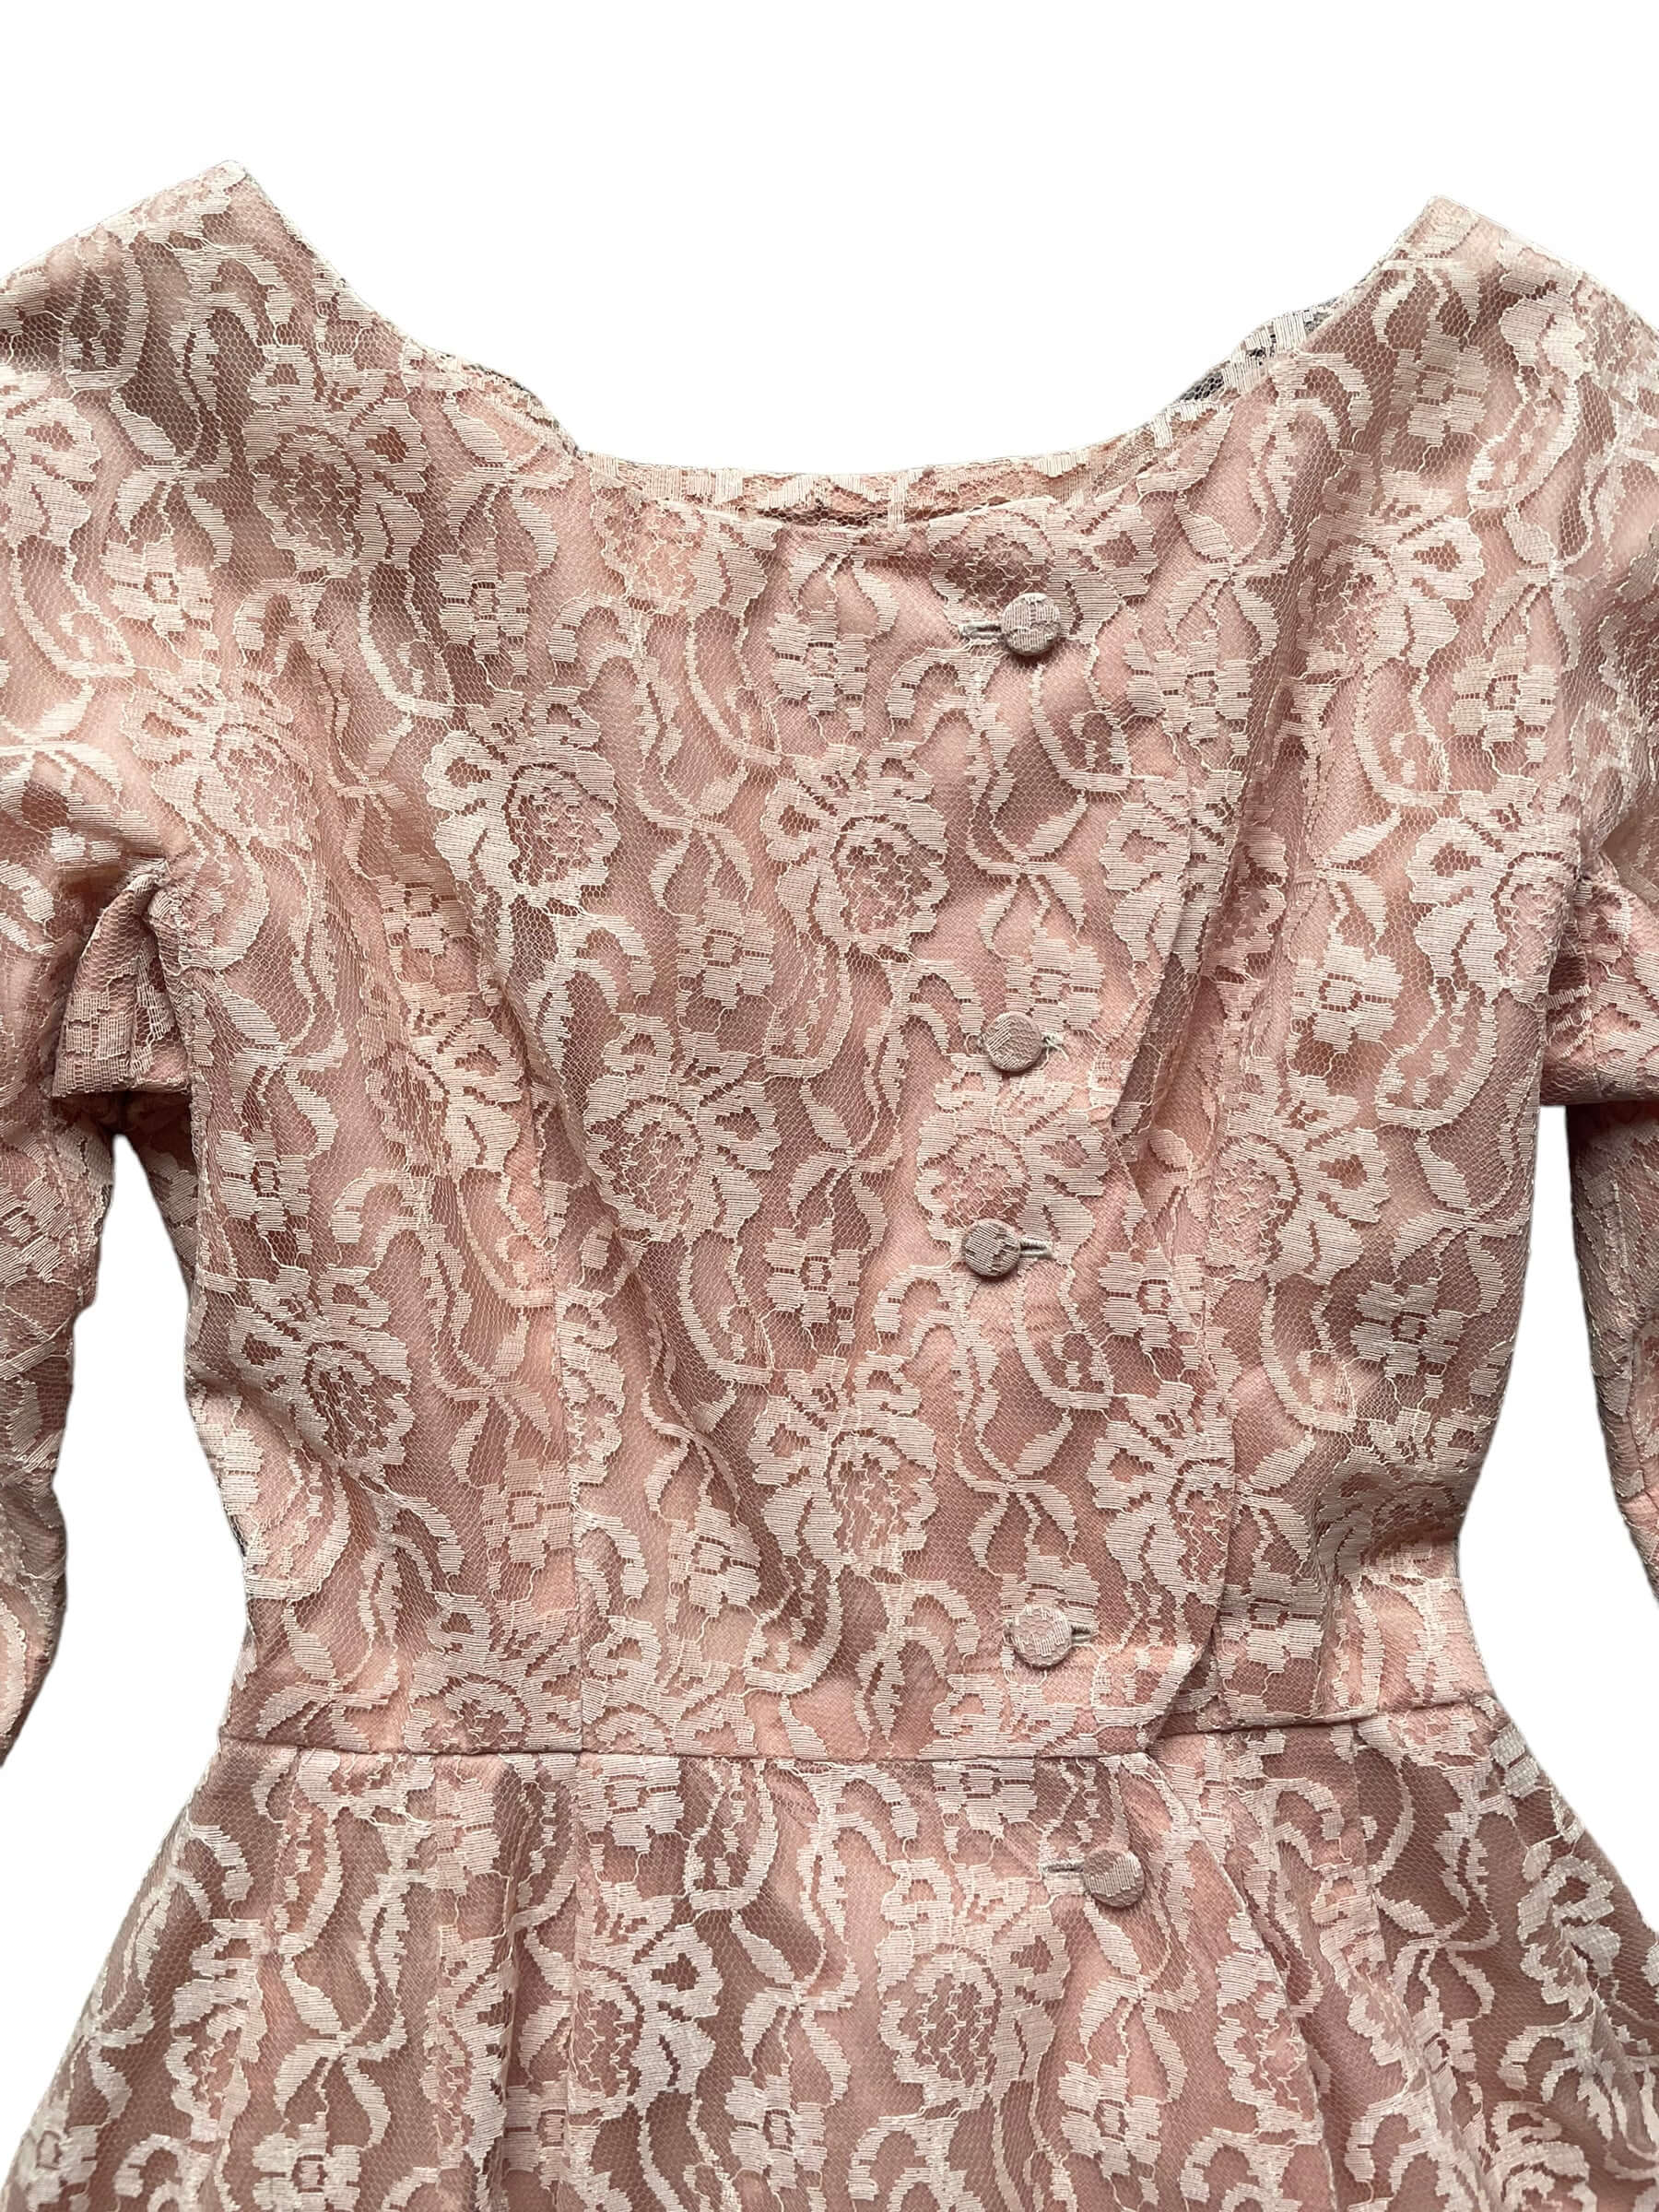 Front chest view of Vintage 1950s Handmade Pink Lace Formal Dress |  Barn Owl Vintage Dresses | Seattle Vintage Ladies Clothing